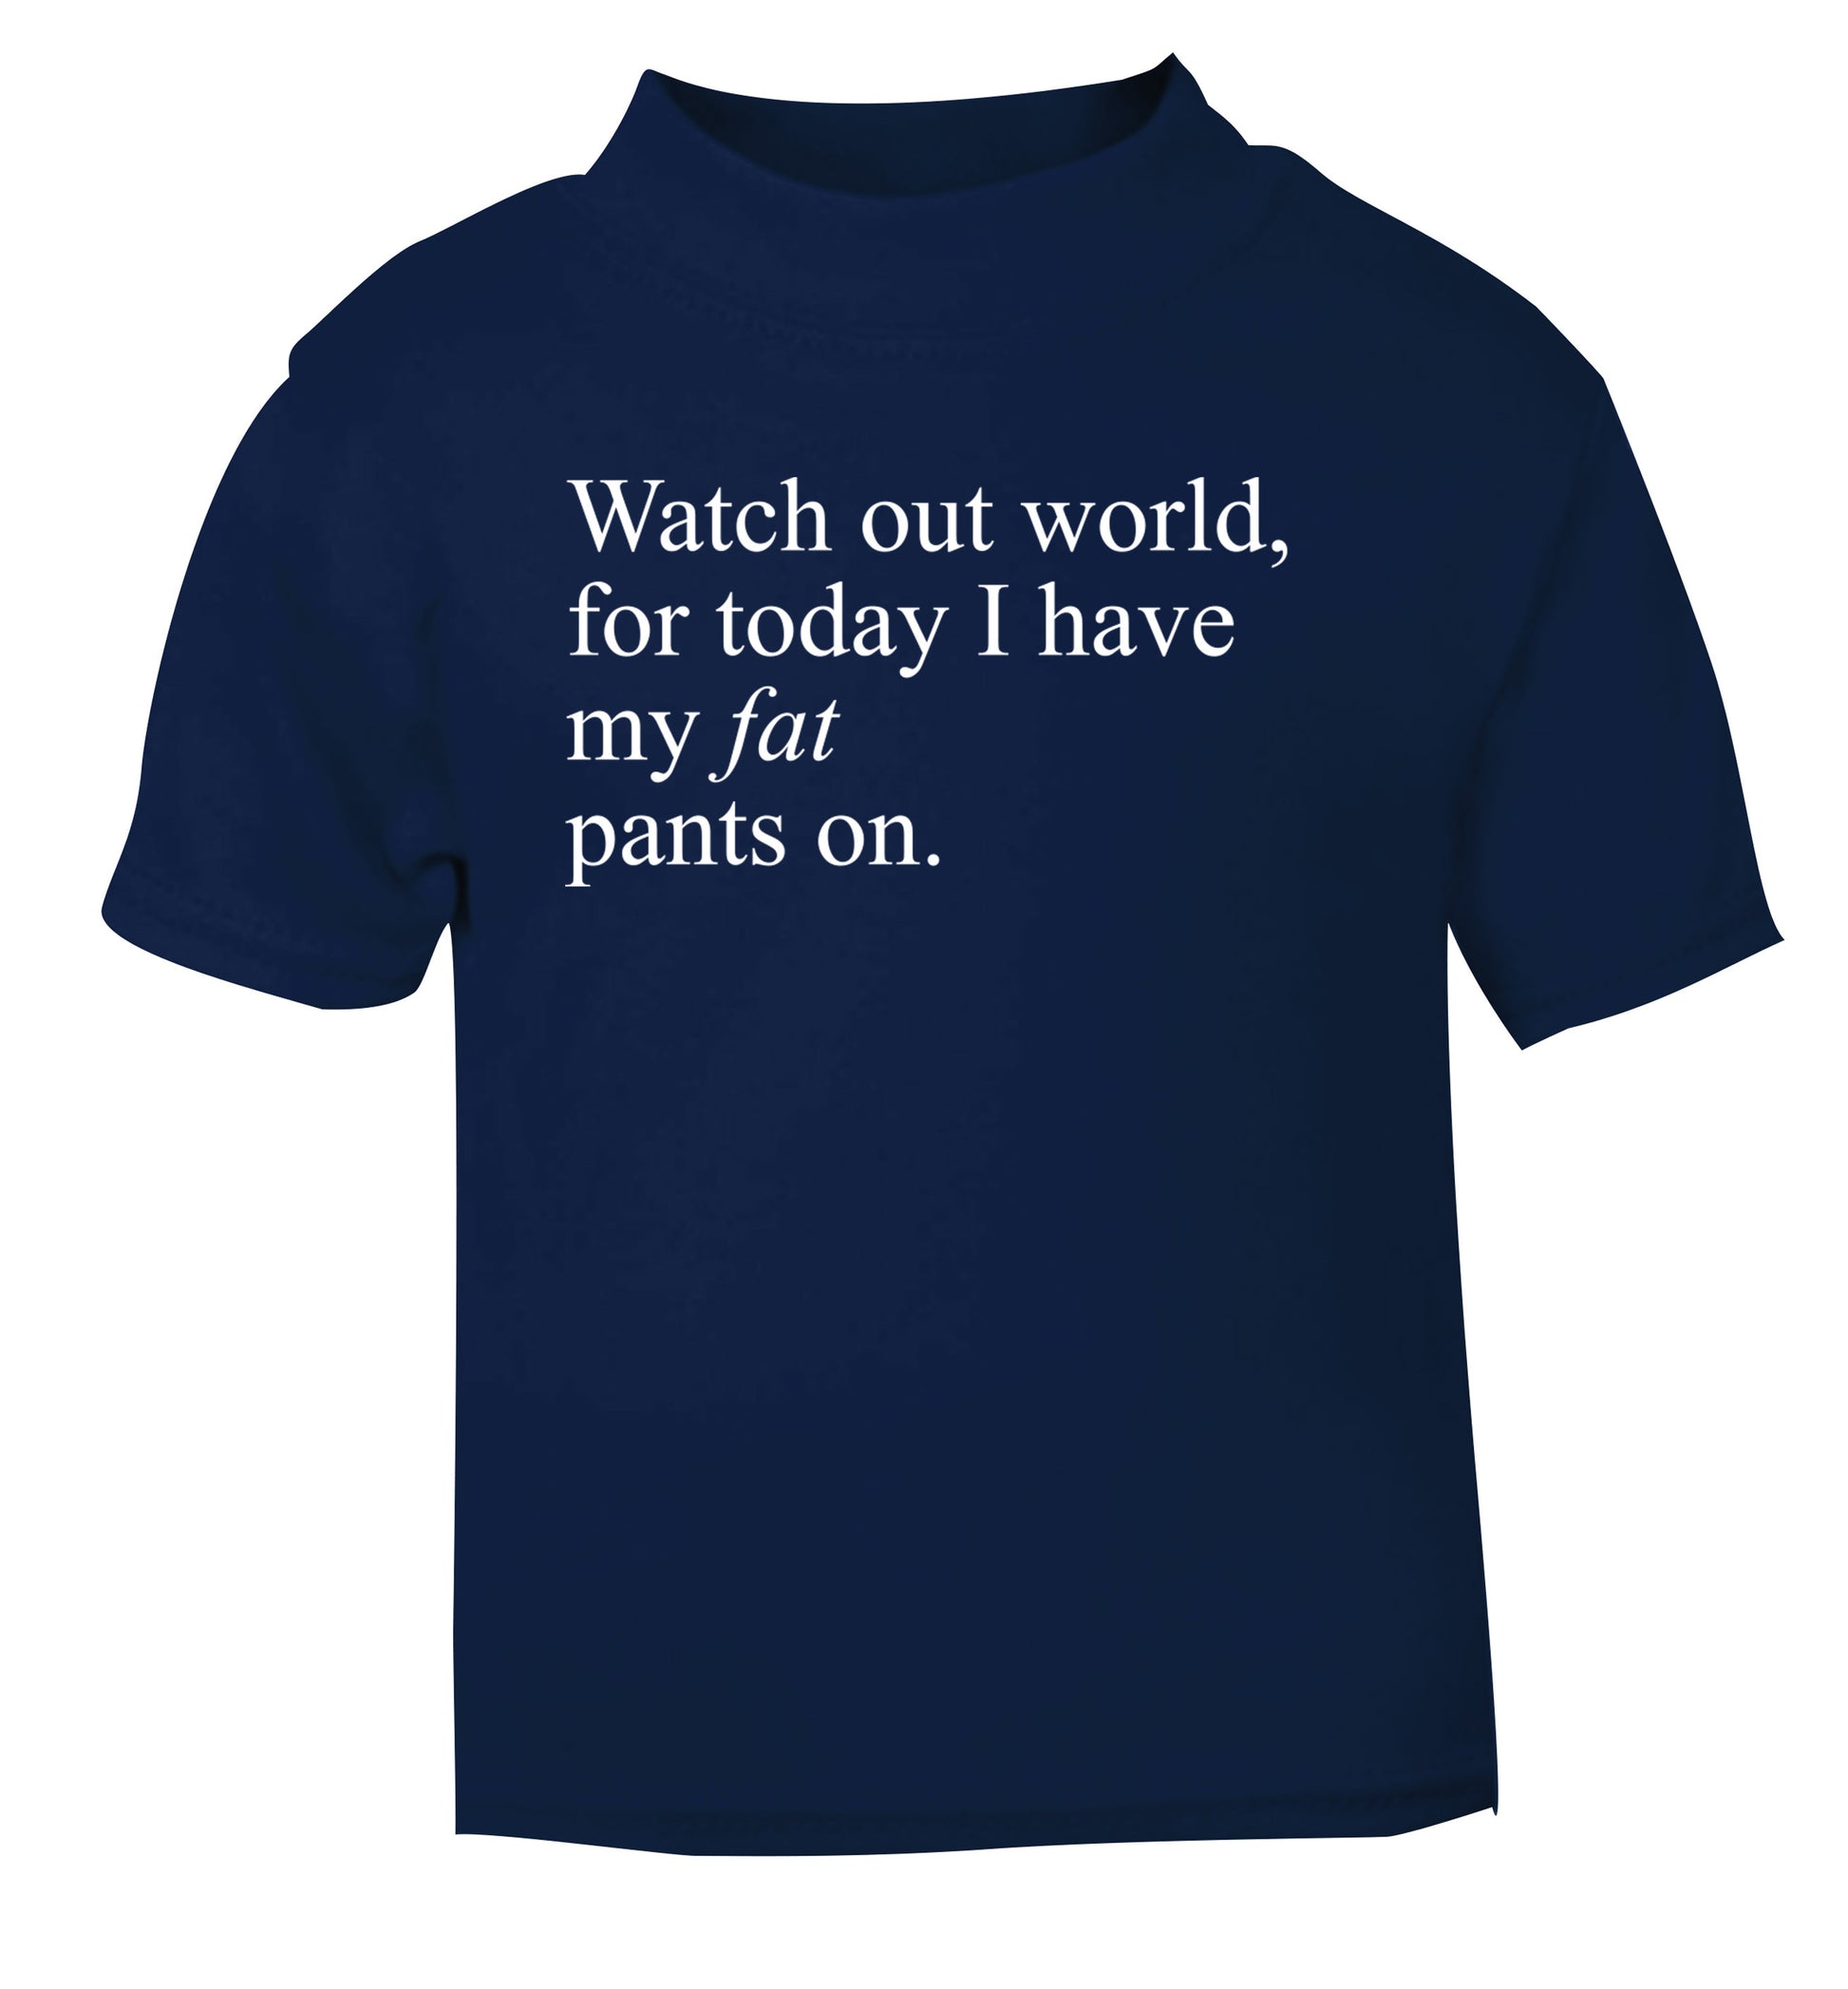 Watch out world, for today I have my fat pants on navy Baby Toddler Tshirt 2 Years